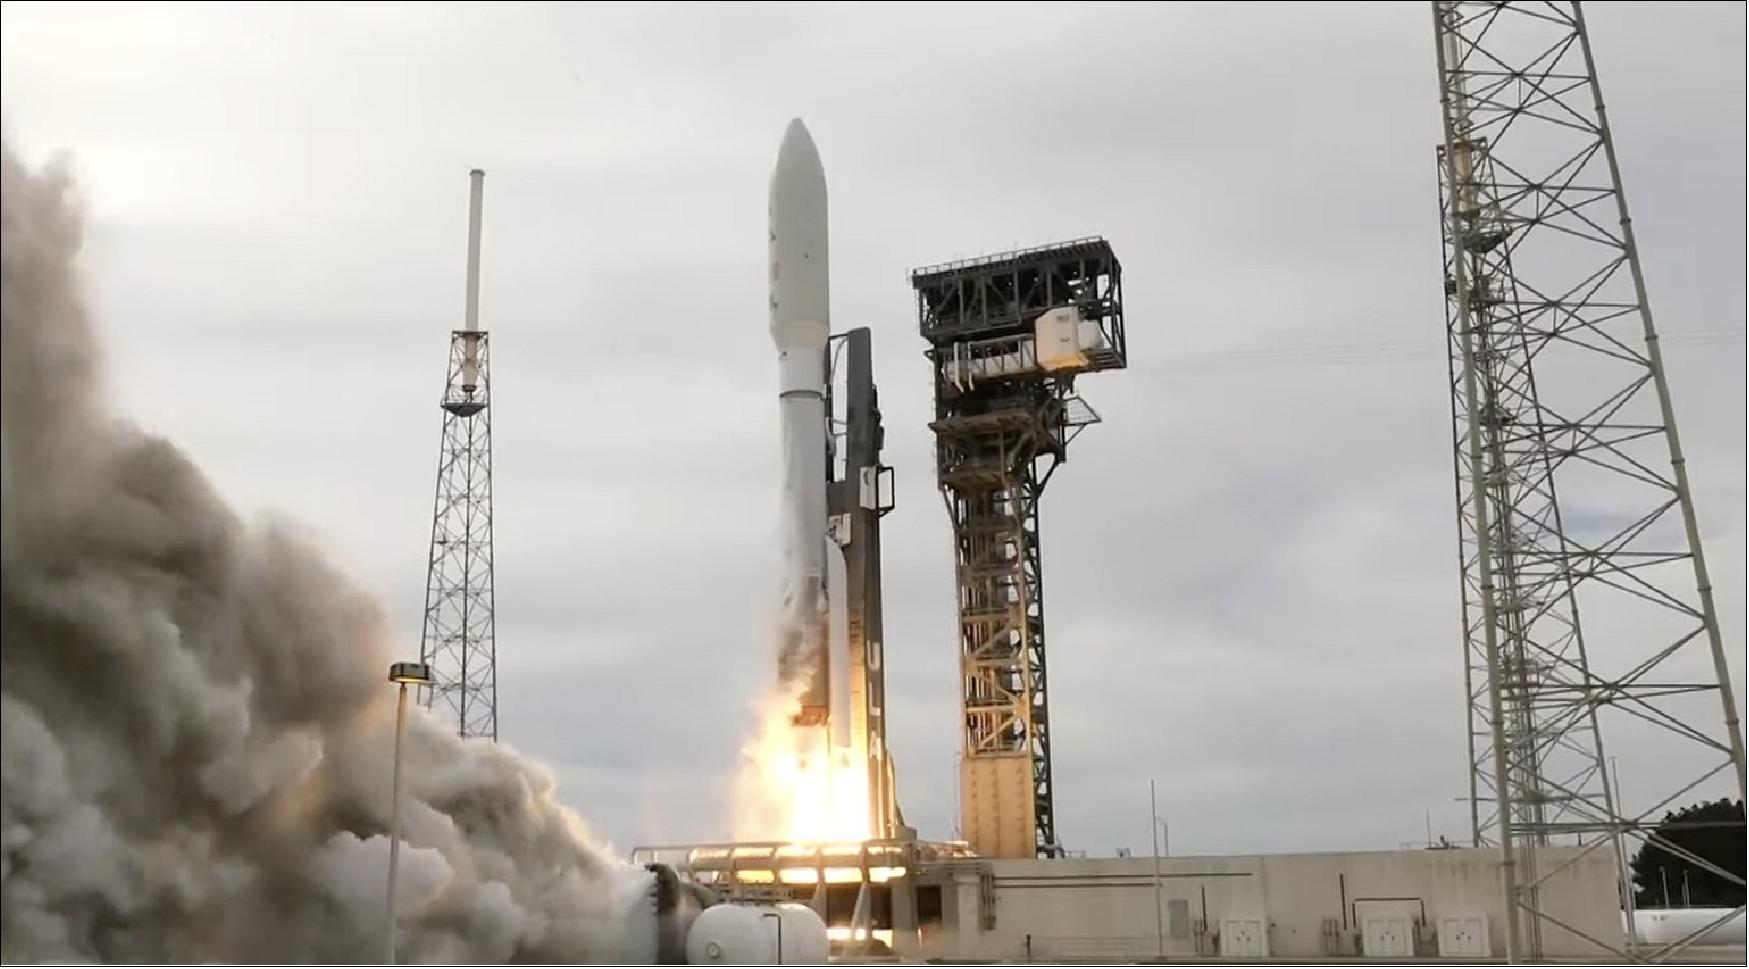 Figure 32: A United Launch Alliance Atlas 5 rocket carrying the USSF-8 mission lifted off Jan. 21, 2022, at 2:00 p.m. Eastern from Space Launch Complex-41 at Cape Canaveral Space Force Station, Florida (image credit: ULA webcast)